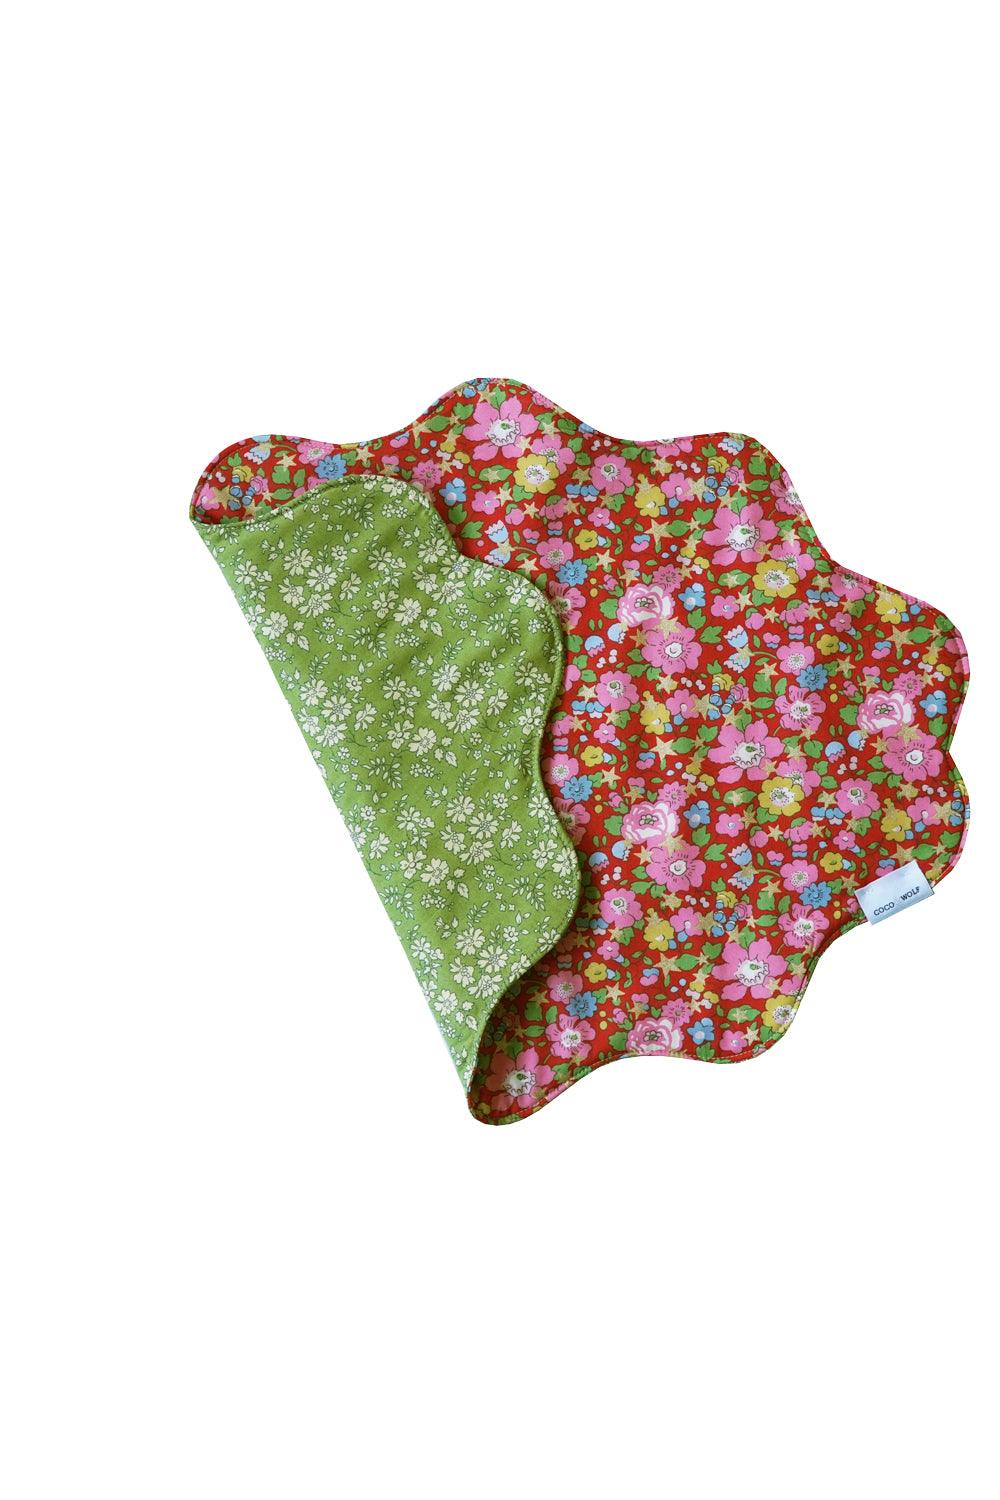 Reversible Wavy Placemat made with Liberty Fabric BETSY STAR & CAPEL PISTACHIO - Coco & Wolf